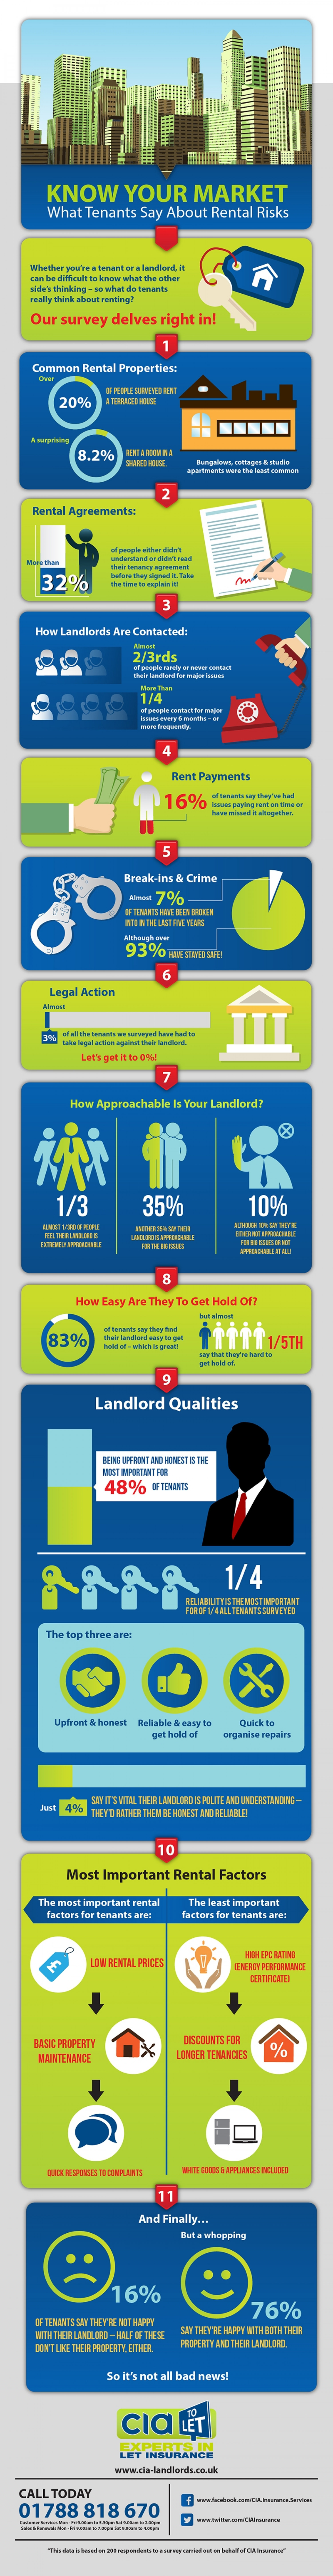 KNOW YOUR MARKET - WHAT TENANTS SAY ABOUT RENTAL RISKS Infographic